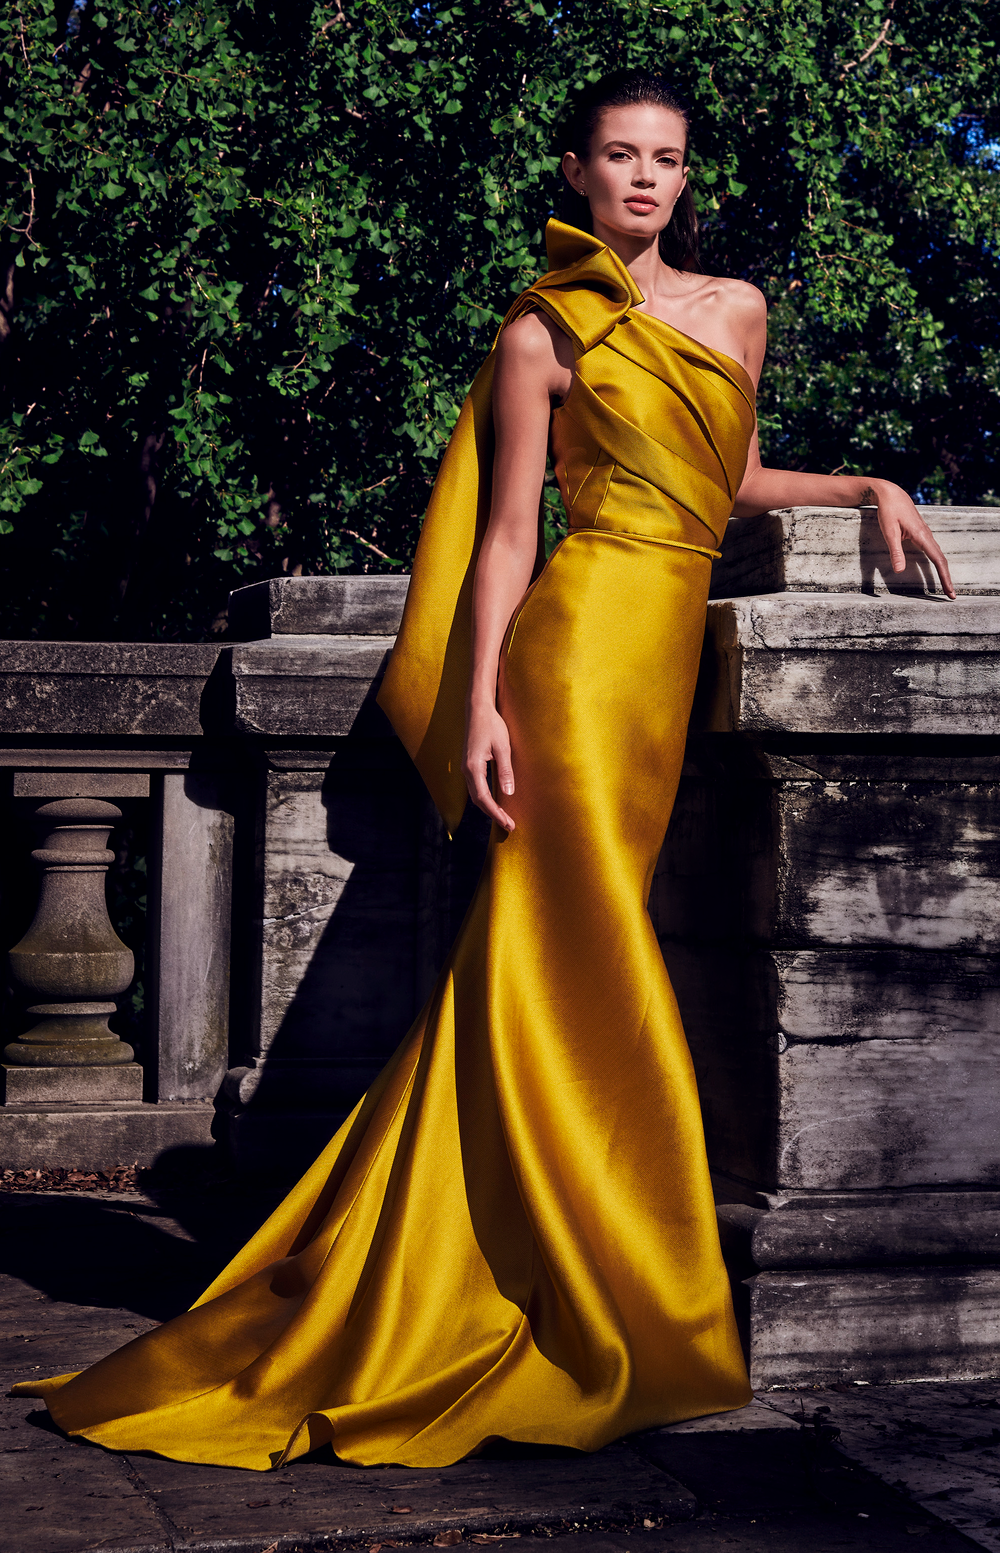 VERDAVAINNE 72521 Golden Delicio One Shoulder Gown, a luxurious gown with one-shoulder design, bias banding, and oversized half-bow, ideal for red carpet events and special occasions.